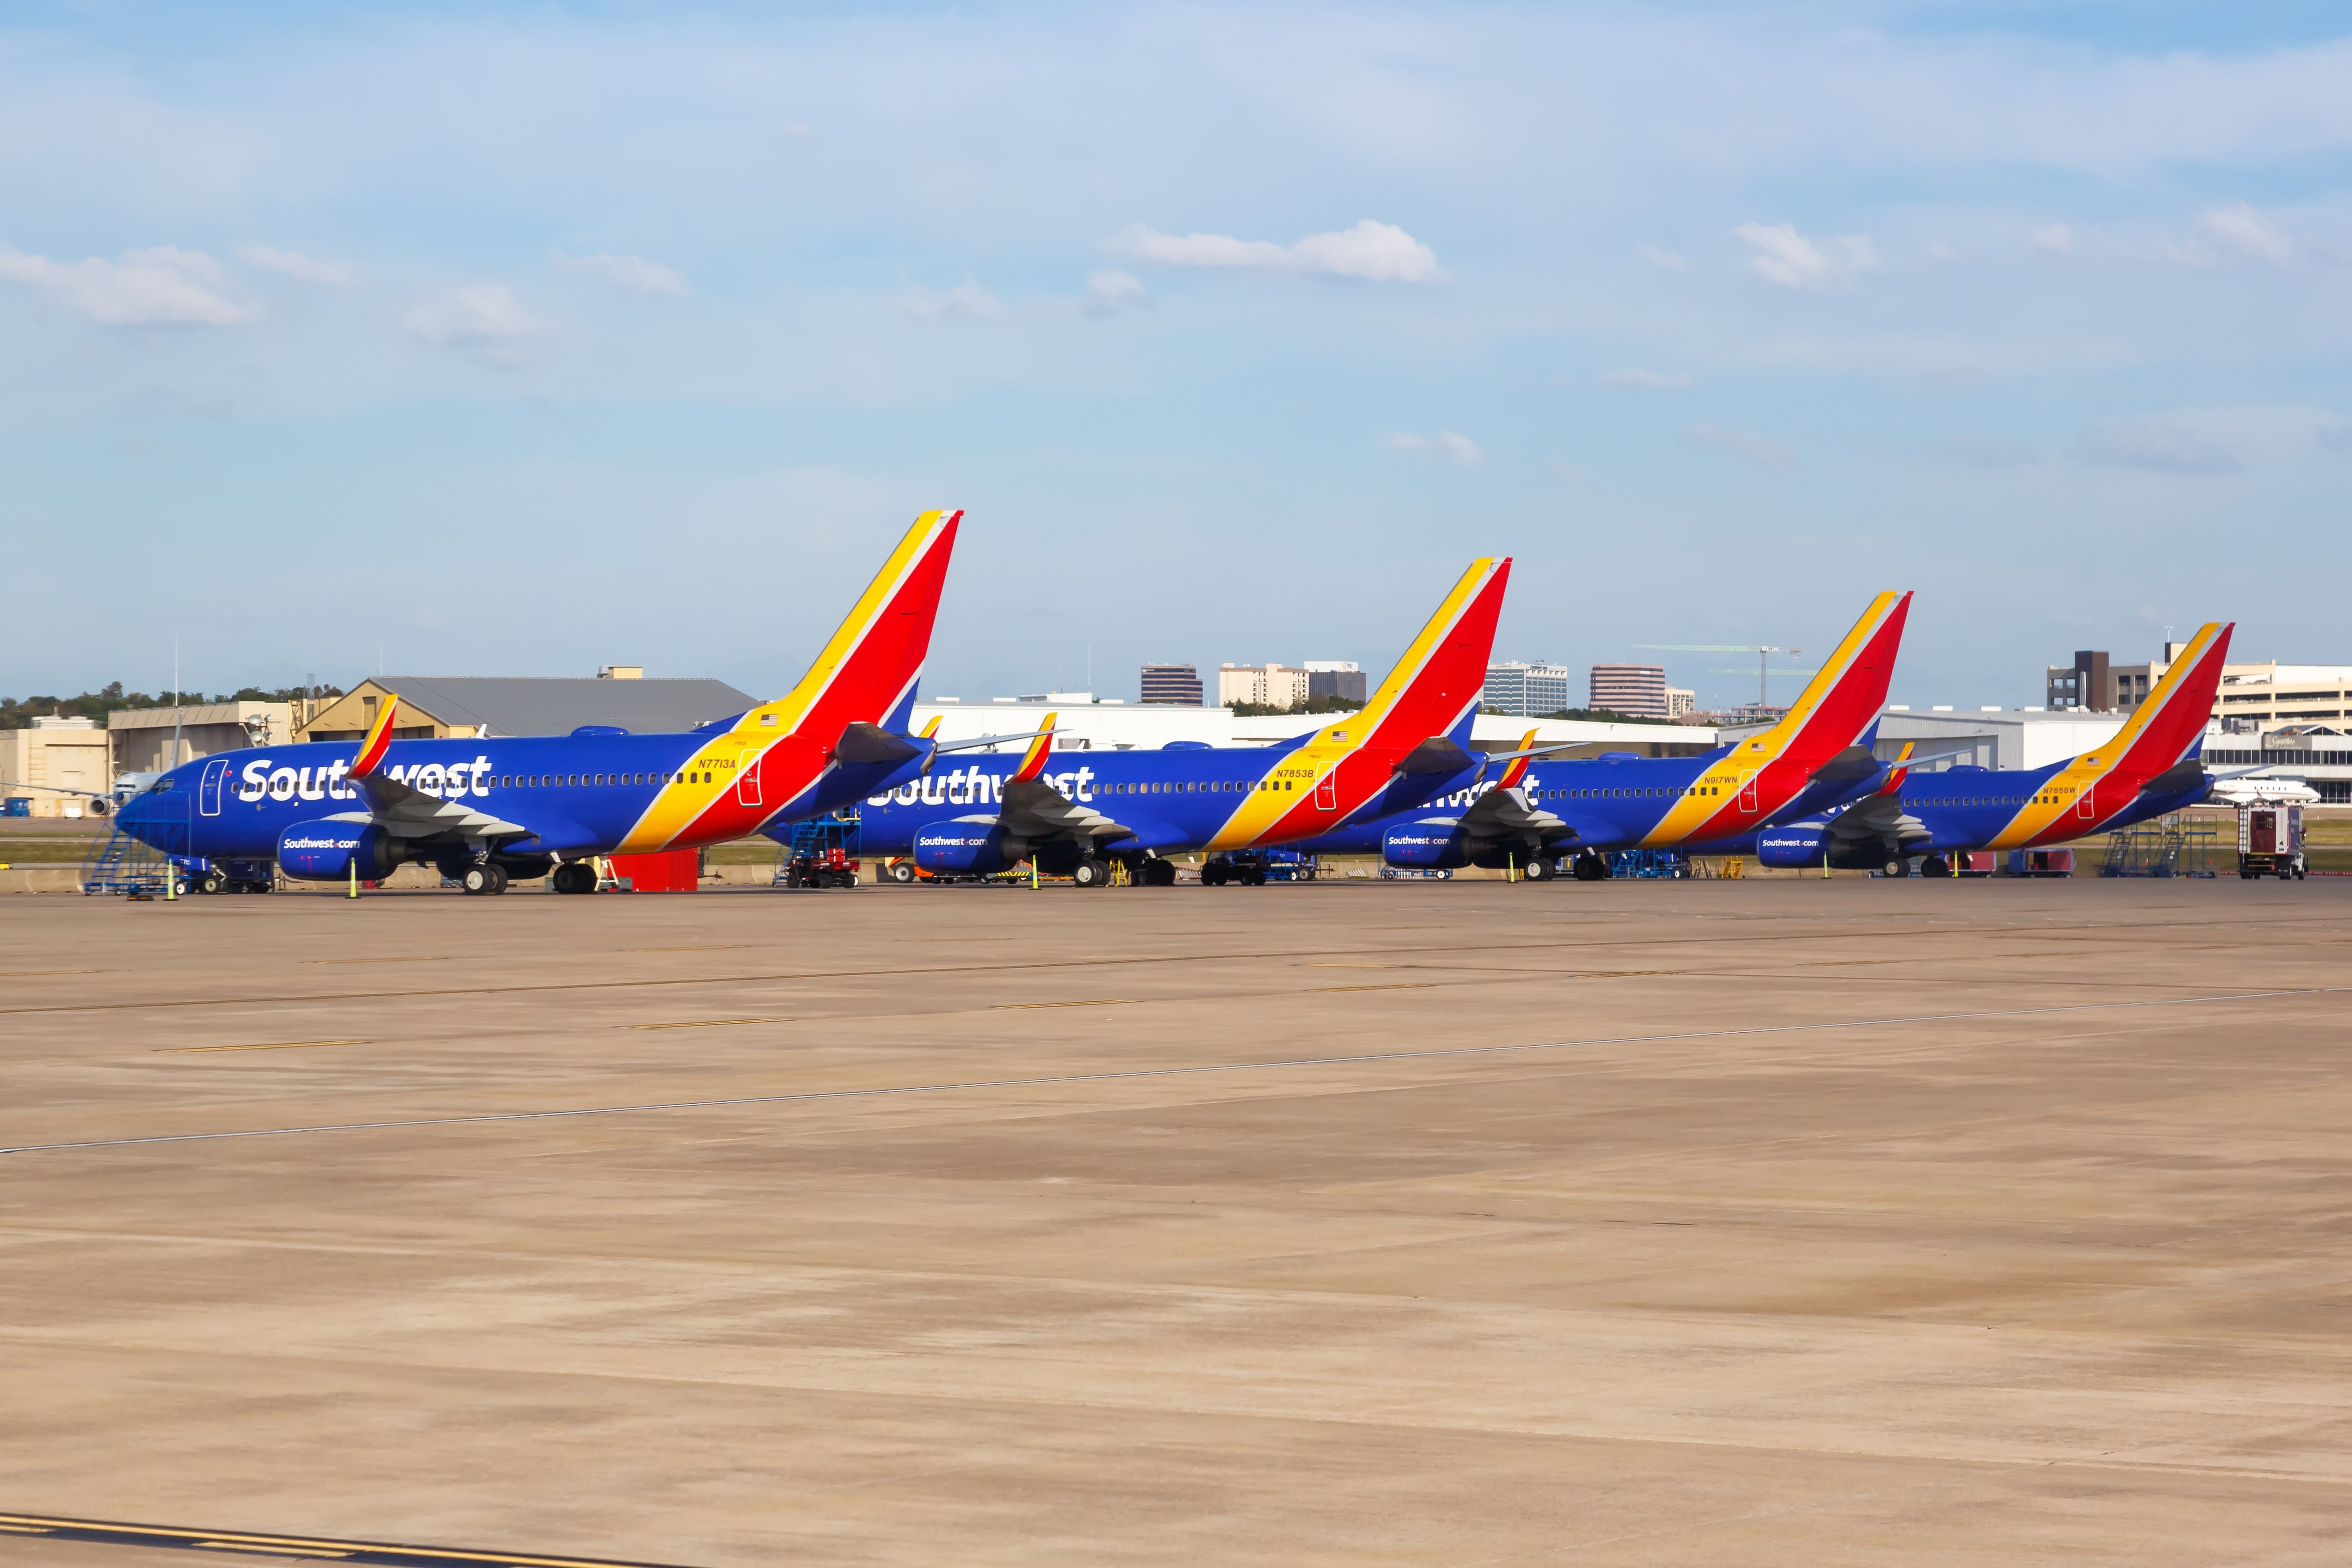 Several Southwest planes parked at Dallas Love Field.